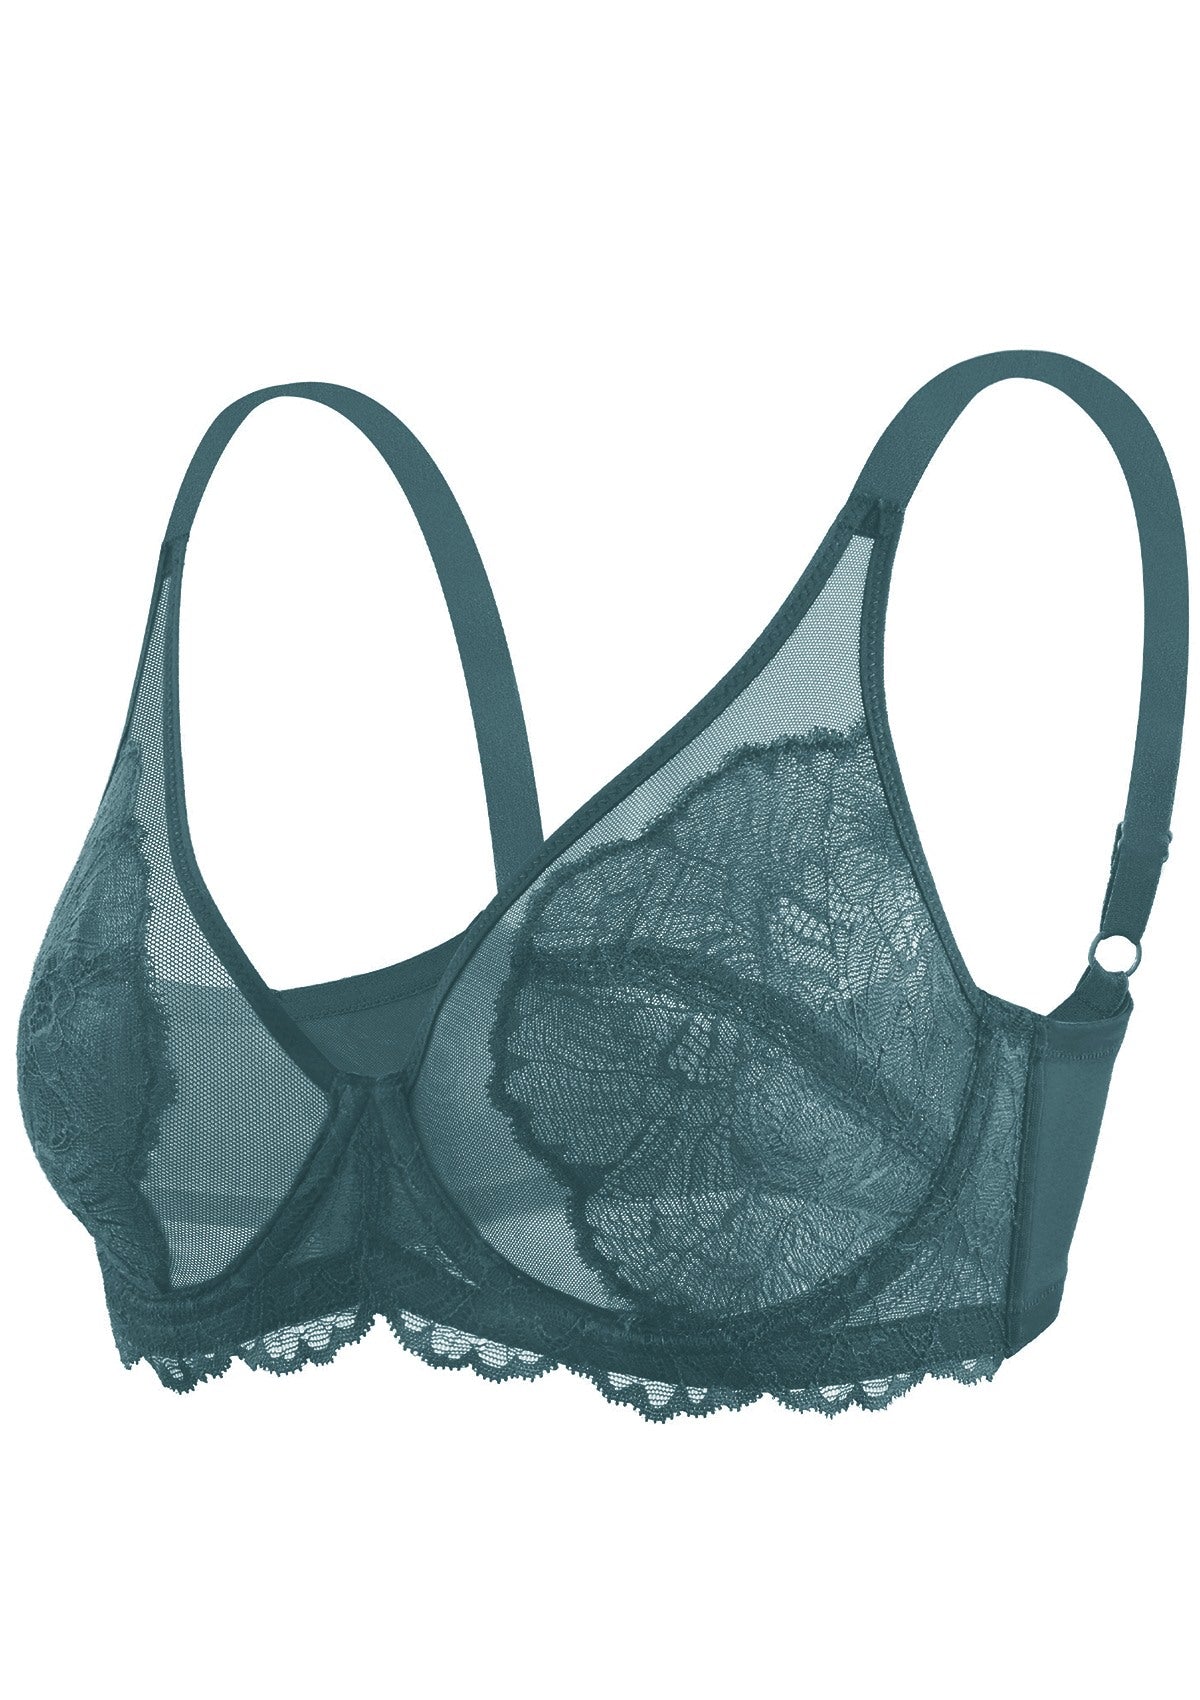 HSIA Blossom Full Figure See-Through Lace Bra For Side And Back Fat - Balsam Blue / 42 / DDD/F